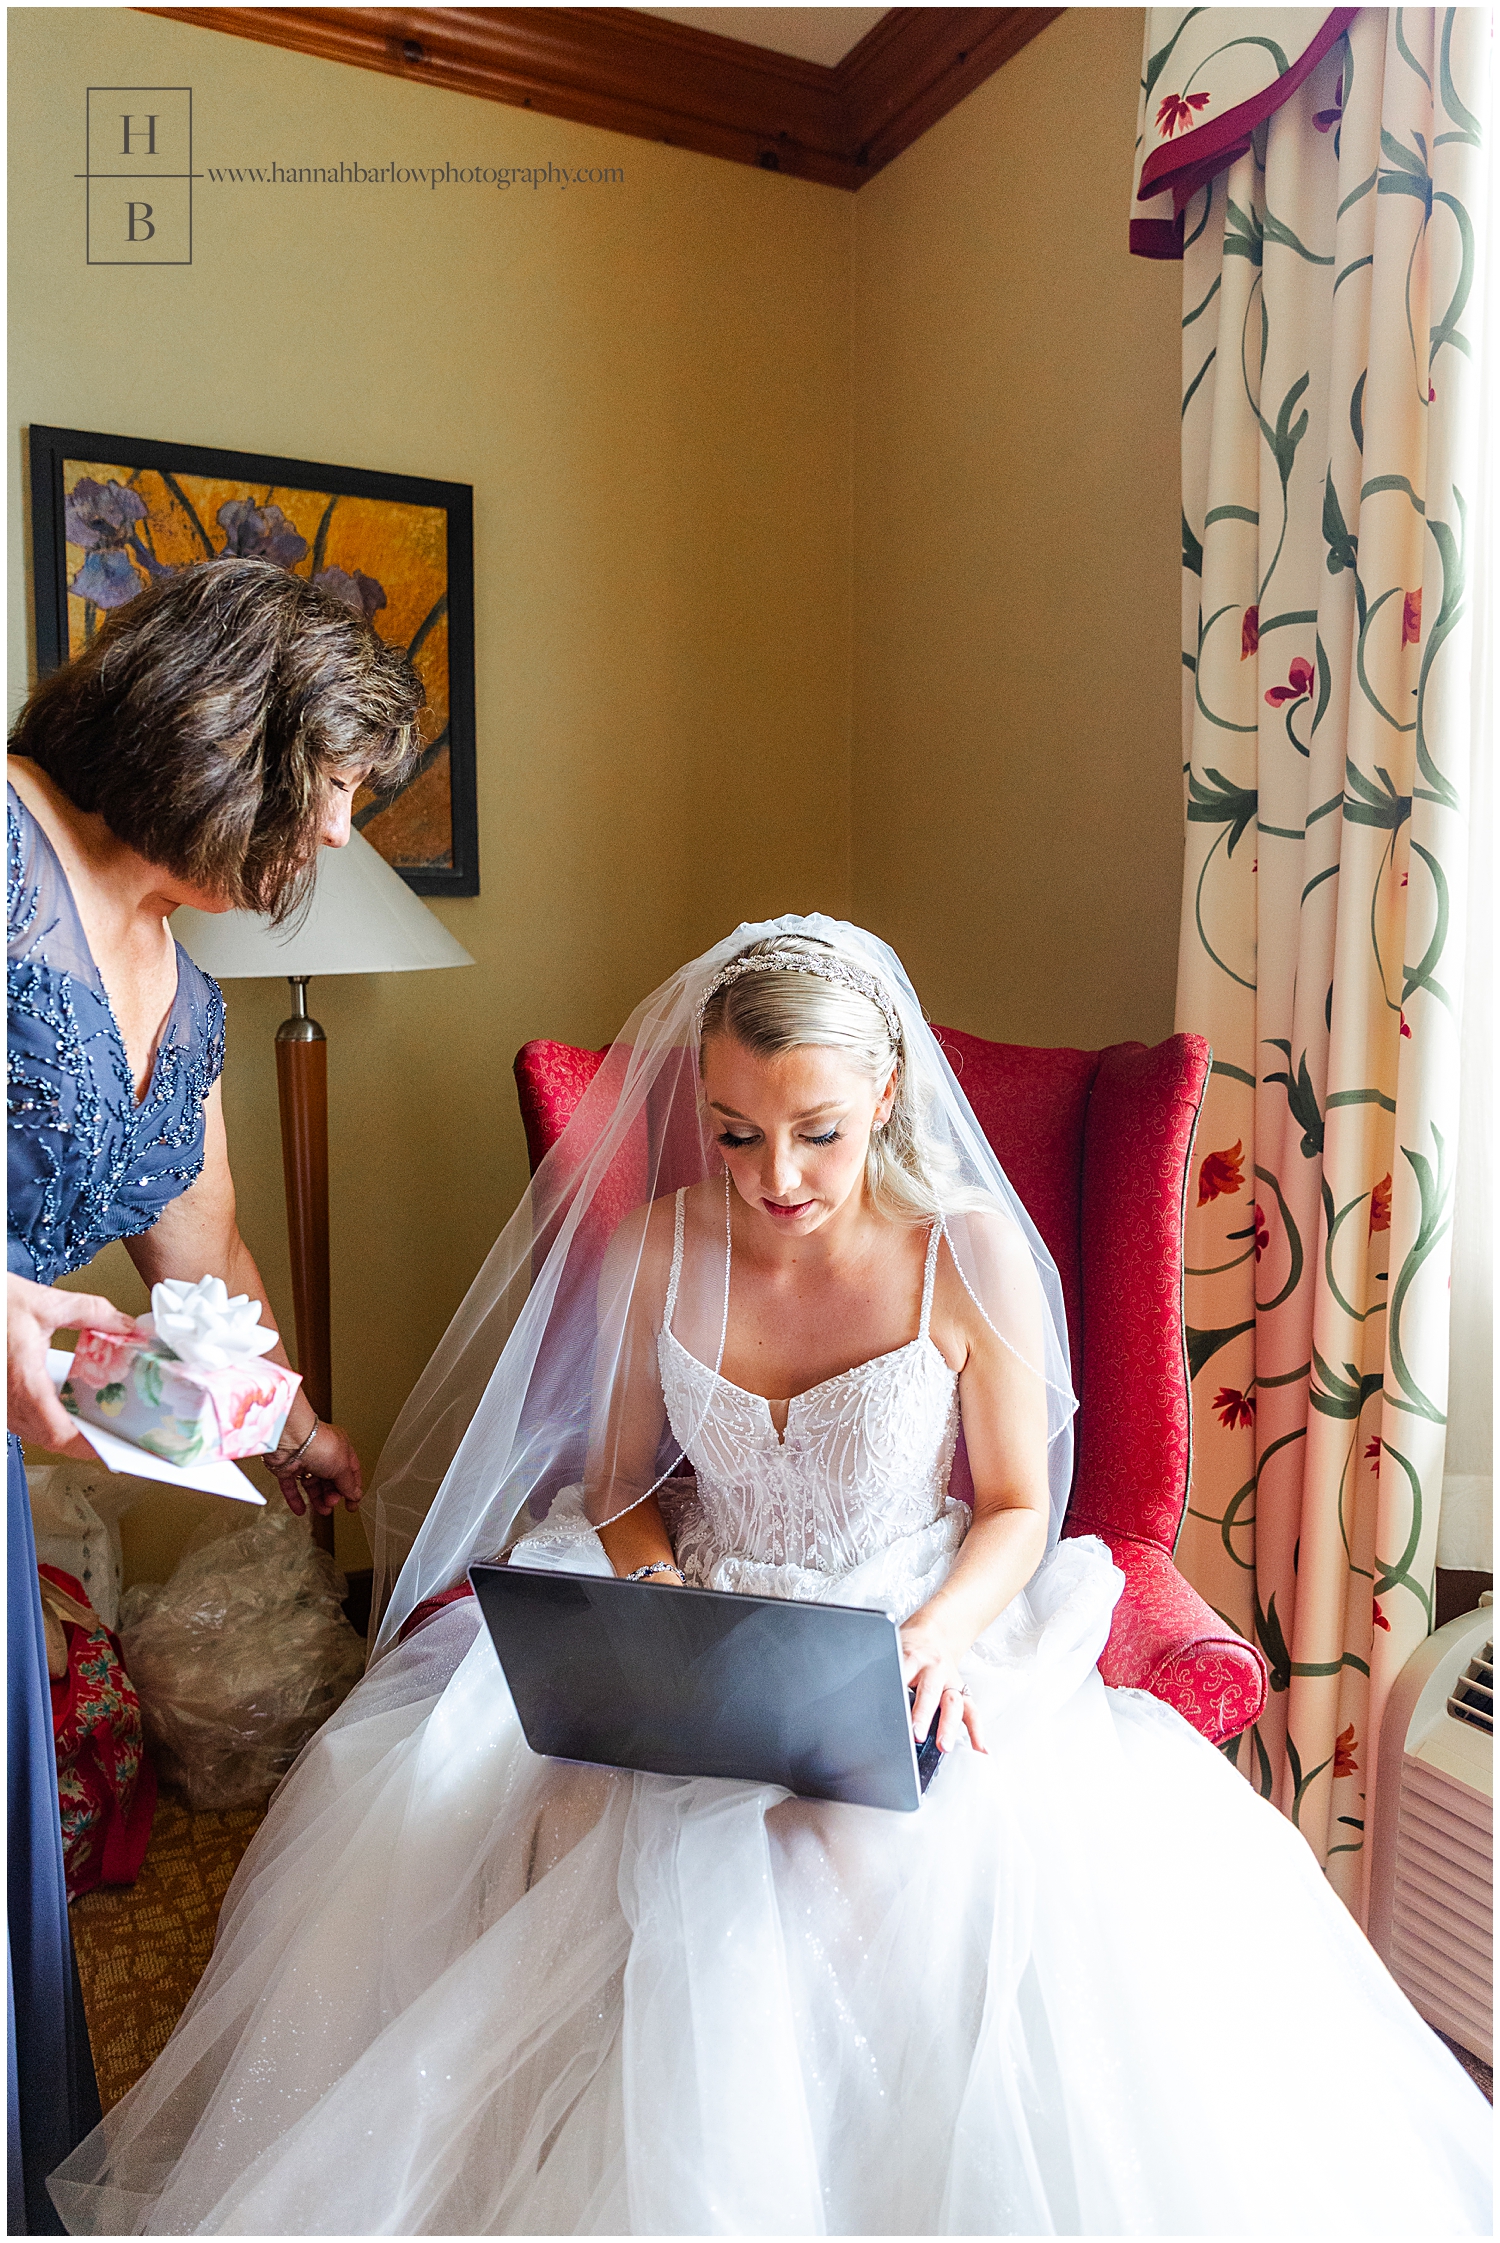 Bride holds computer on lap with mom standing at side.